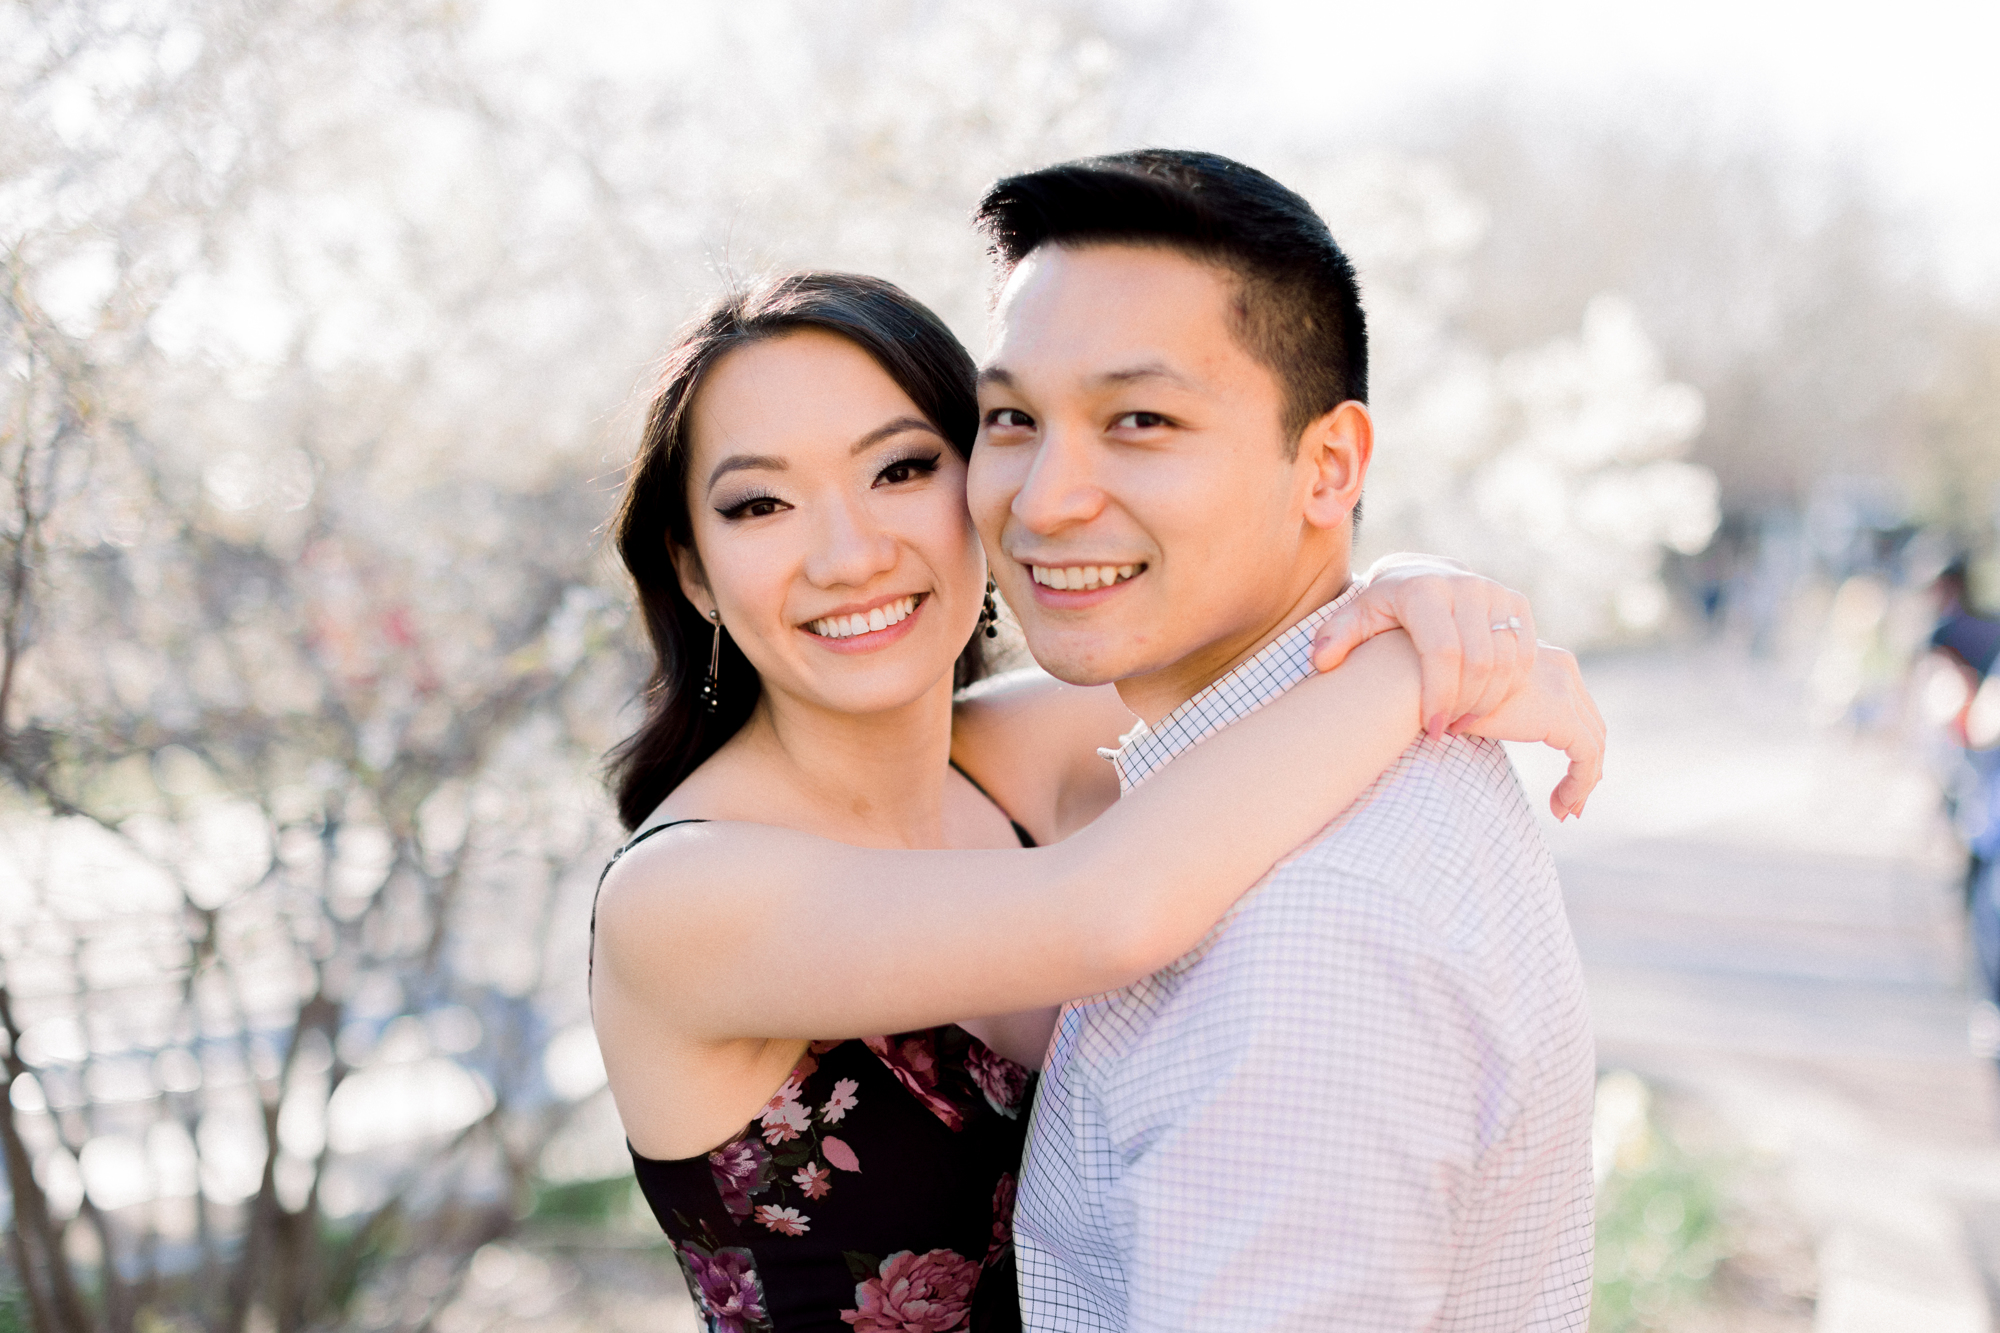 Radiant New York Engagement Photography with Spring Blossoms